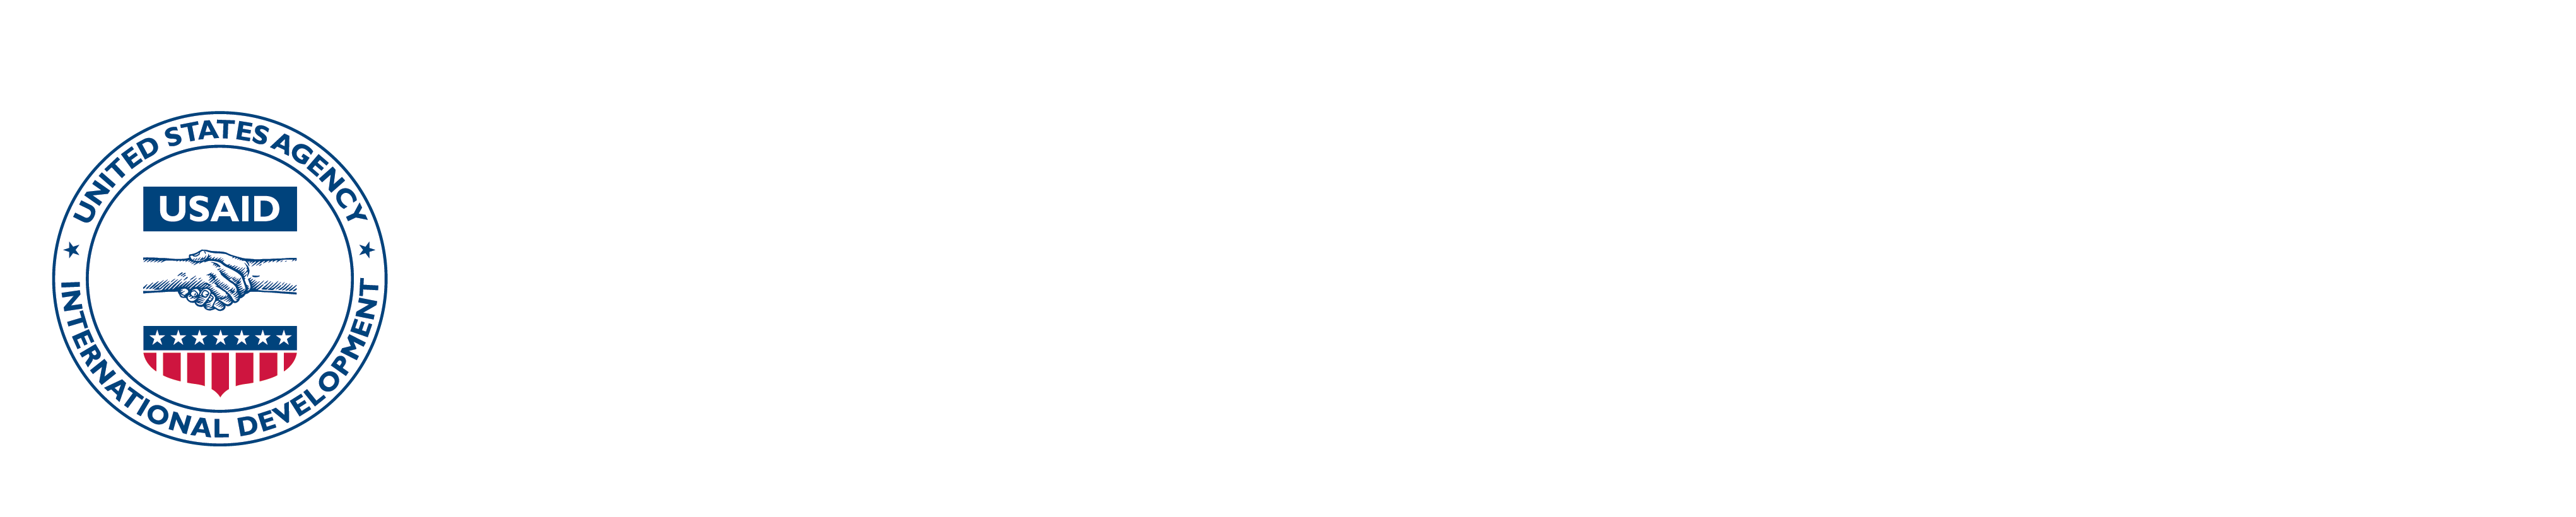 US AID and Momemtum logos